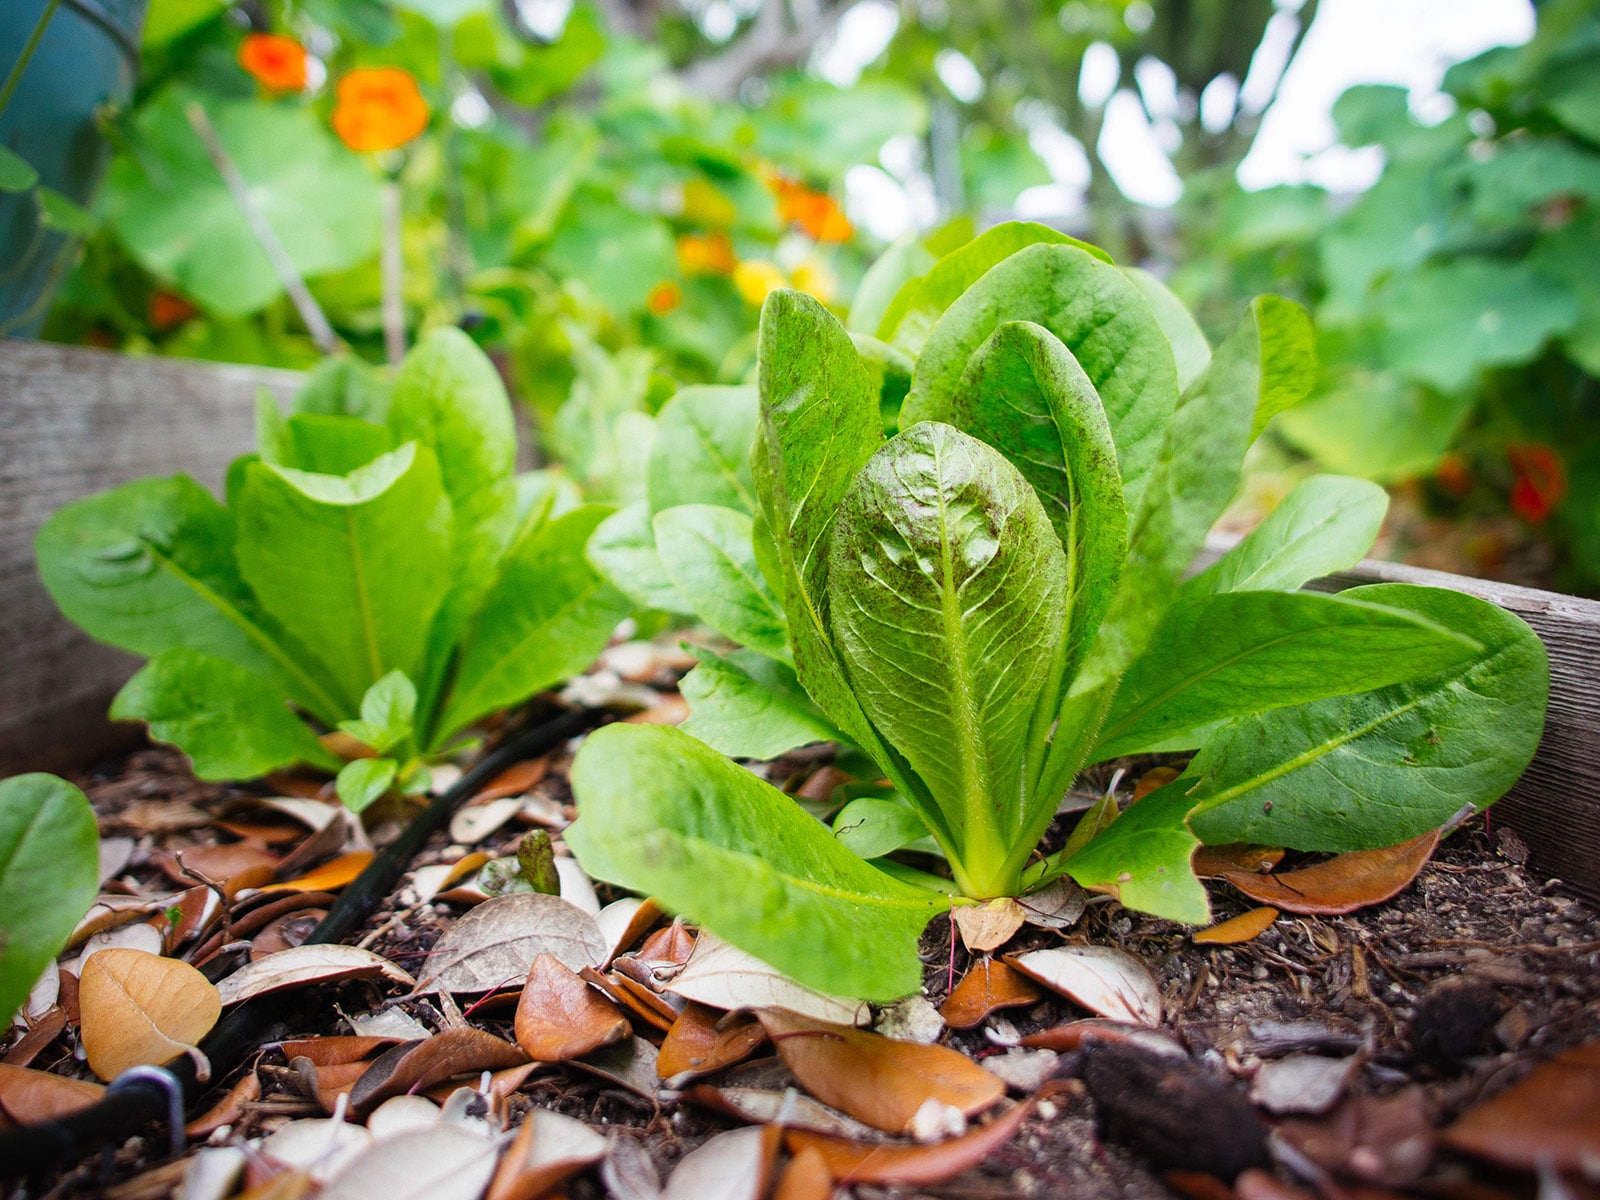 Small heads of lettuce growing in a garden bed